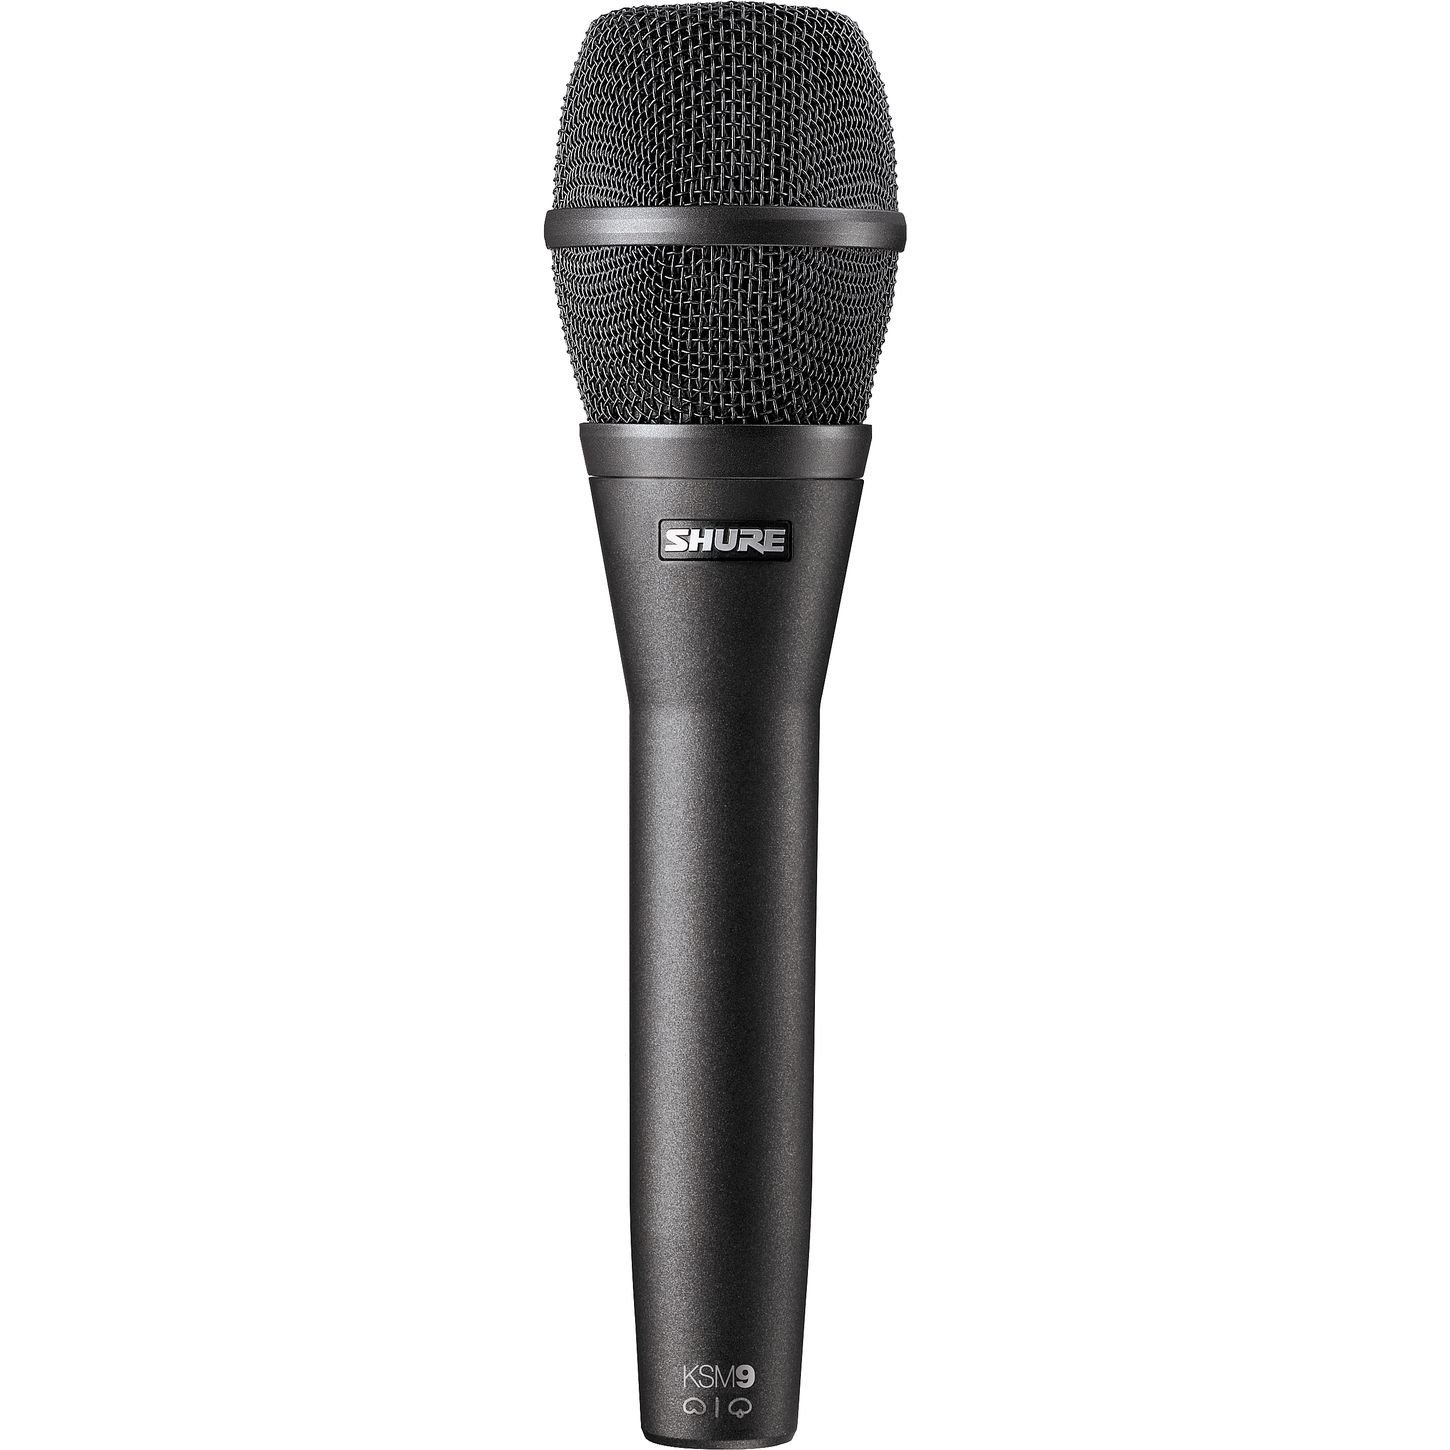 Shure KSM9 Vocal Cardioid Condenser Microphone - Charcoal Grey